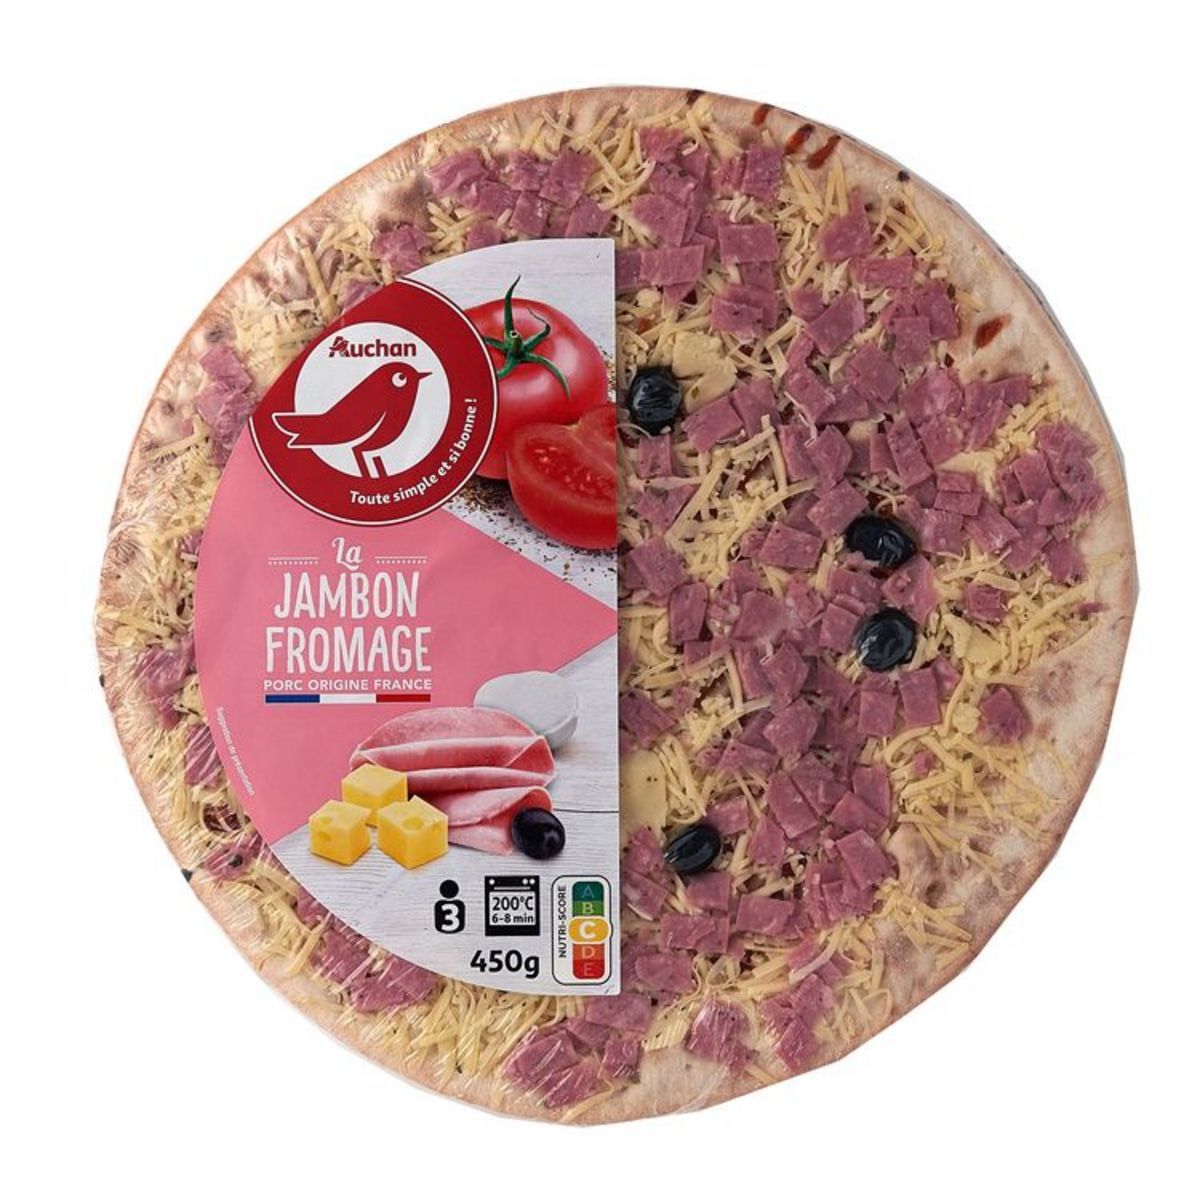 PIZZA JAMBON FROMAGE AUCHAN 